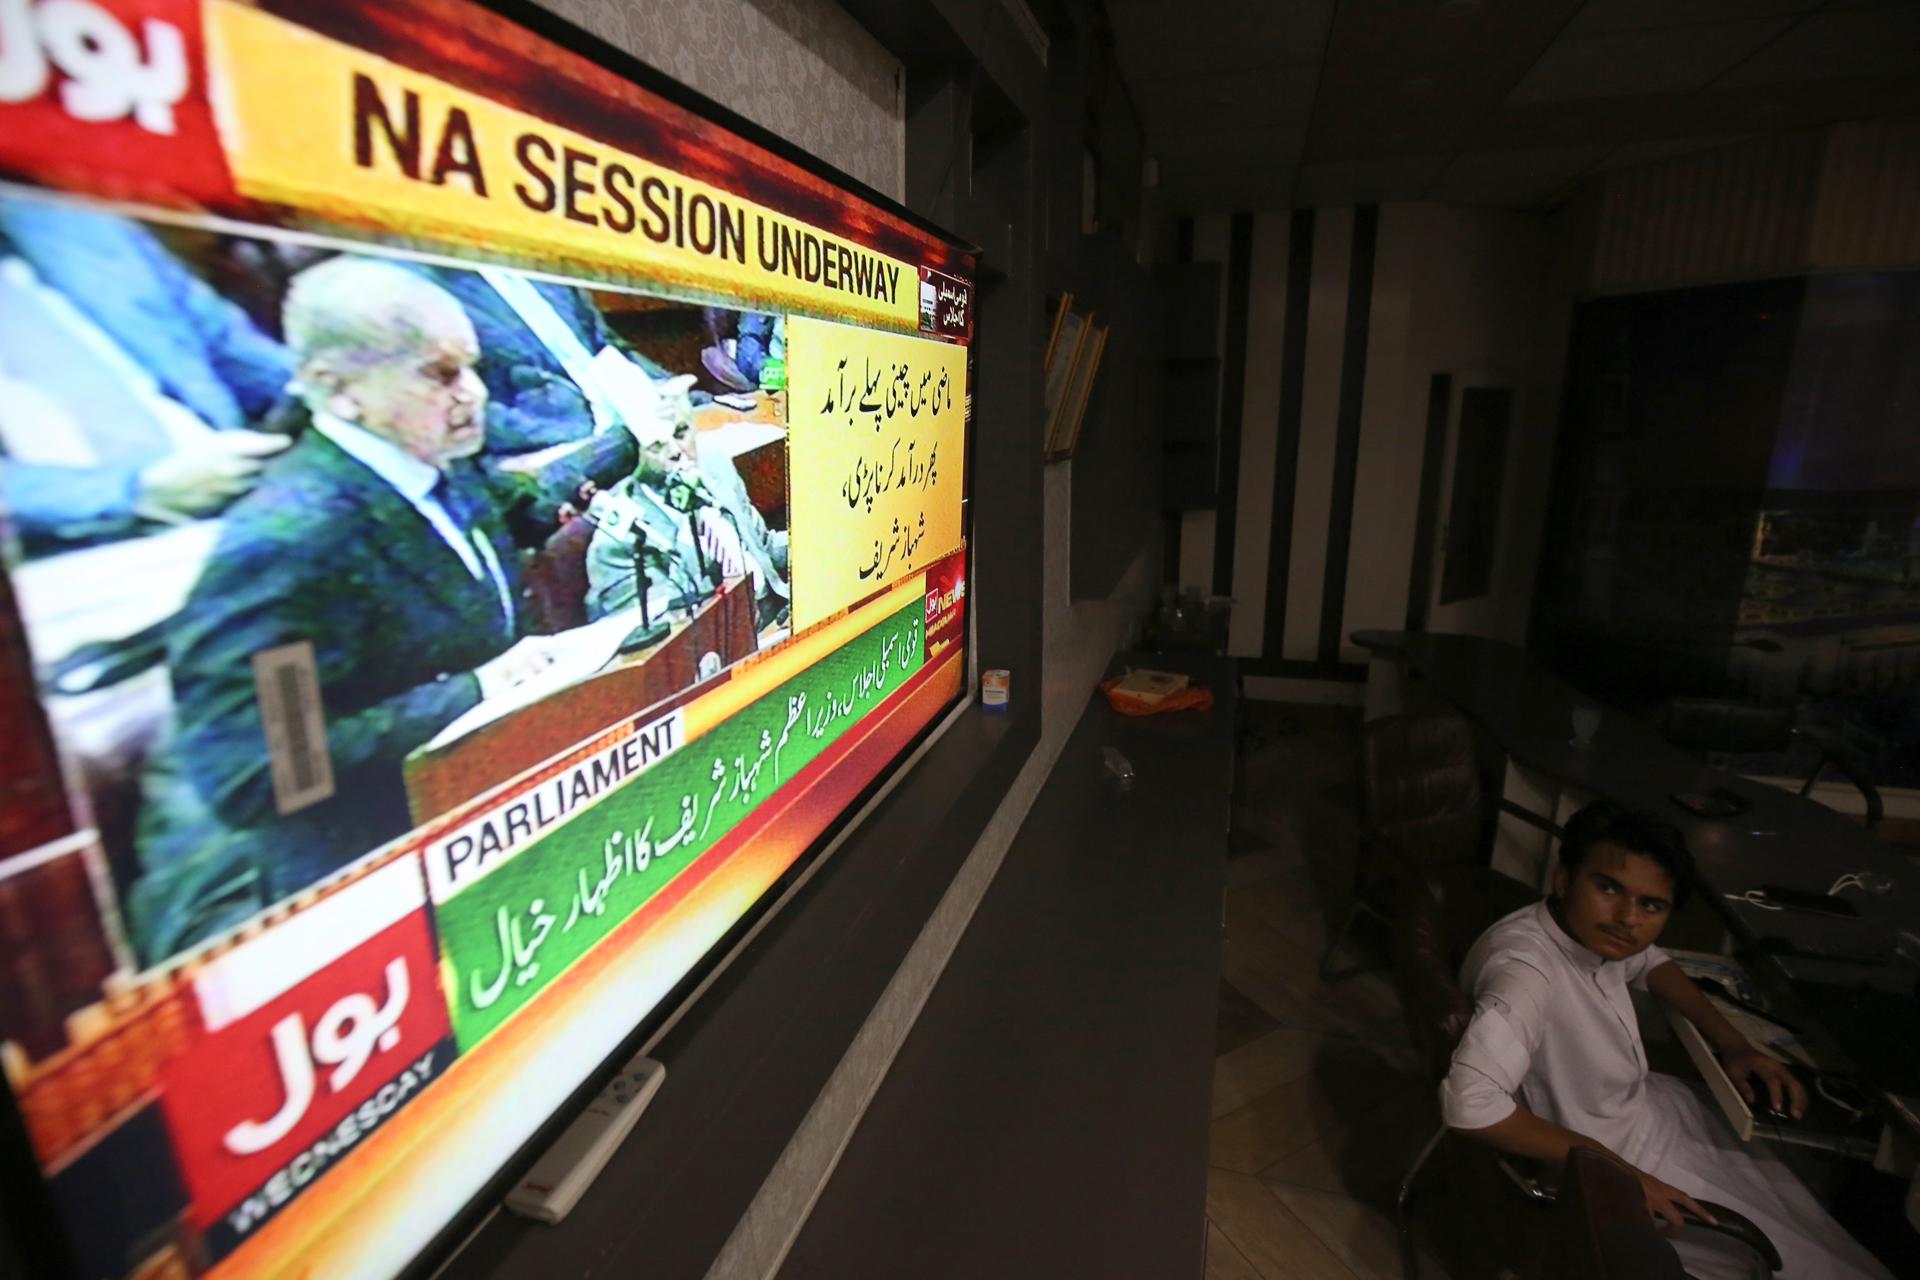 A Pakistani man watches a farewell televised speech of Pakistani Prime Minister Shehbaz Sharif, broadcast live on TV at Parliament as the government completes its five-year constitutional term, in Peshawar, Pakistan, 09 August 2023. EFE/EPA/BILAWAL ARBAB